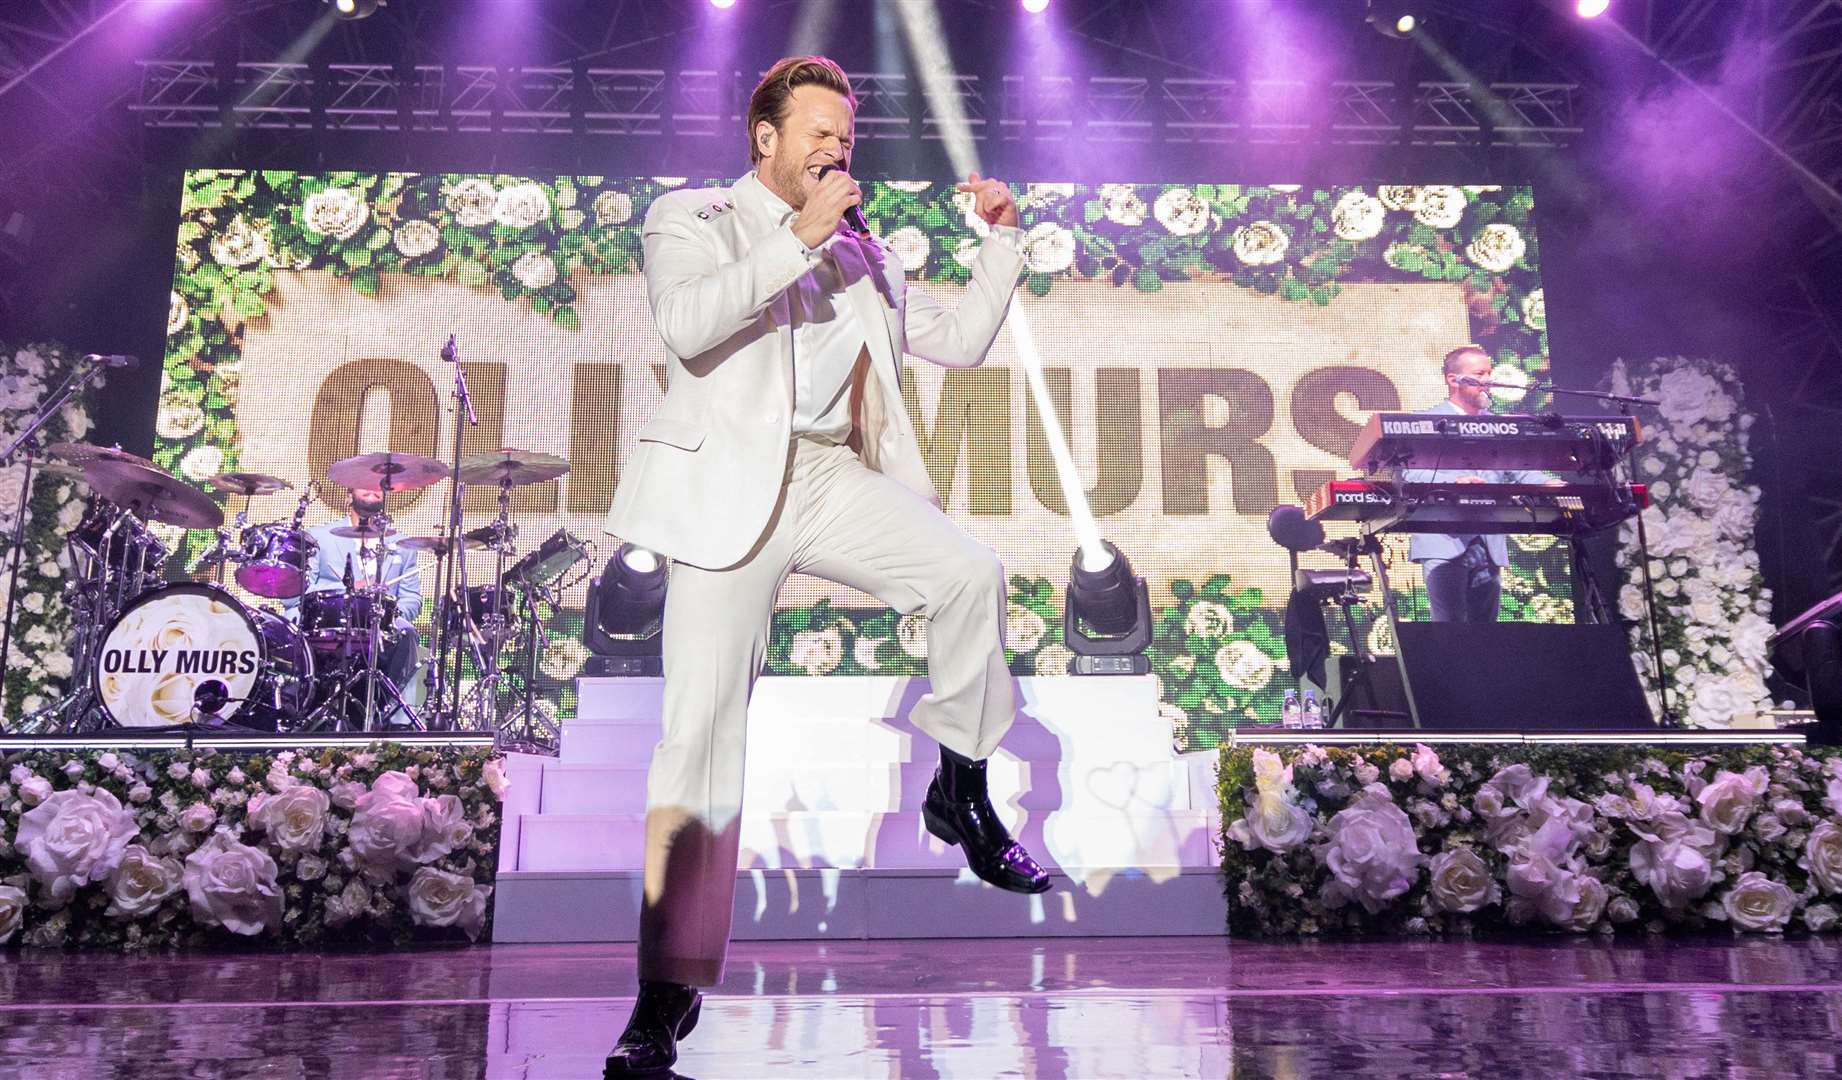 X Factor singer Olly Murs performed at this year’s Summer Concert Series. Picture: Jasmine Marceau